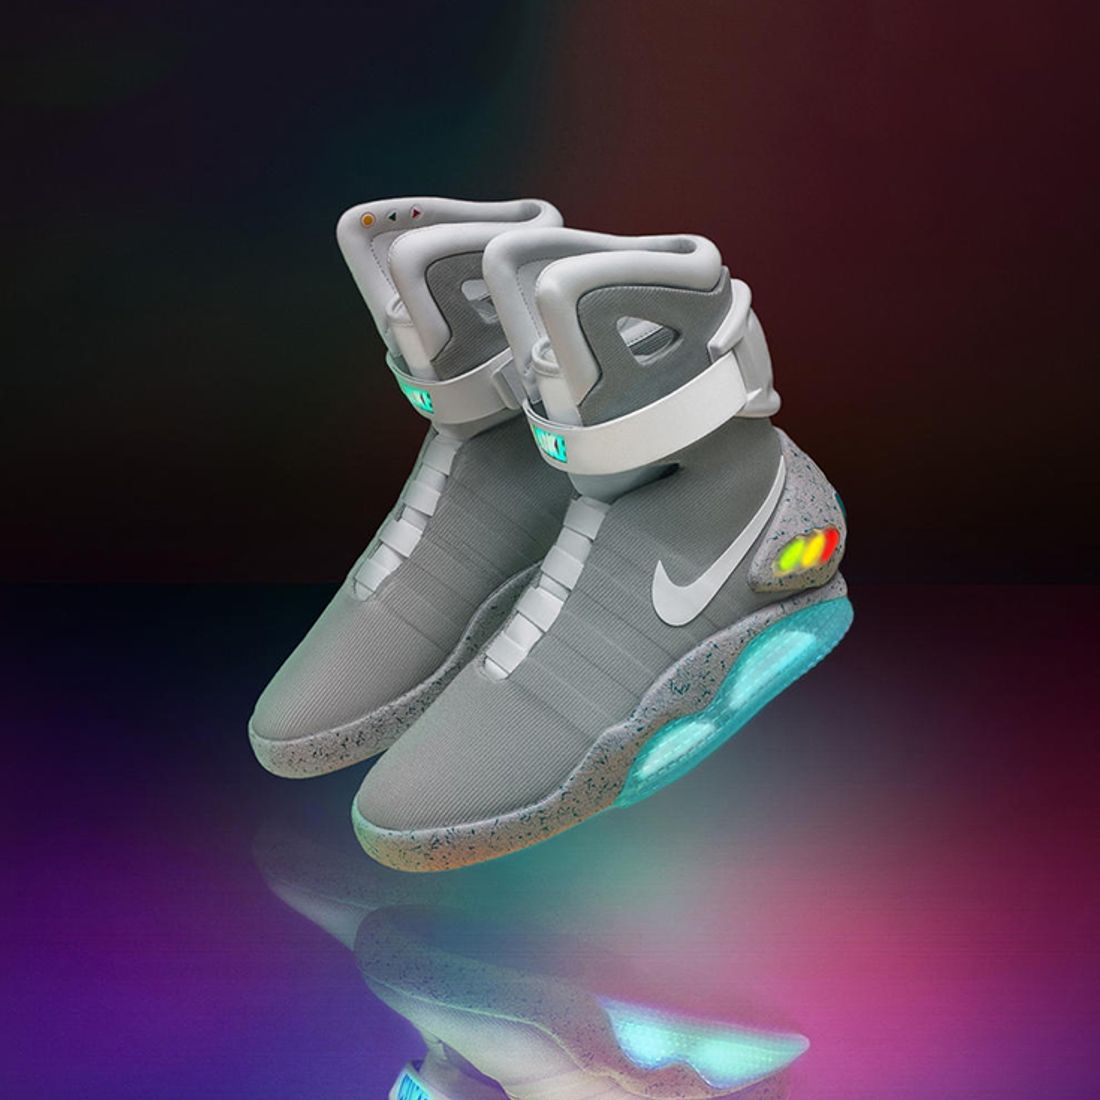 Years On: A Look at the Nike Air Mag's Long-Awaited 2011 Release - Sneaker Freaker